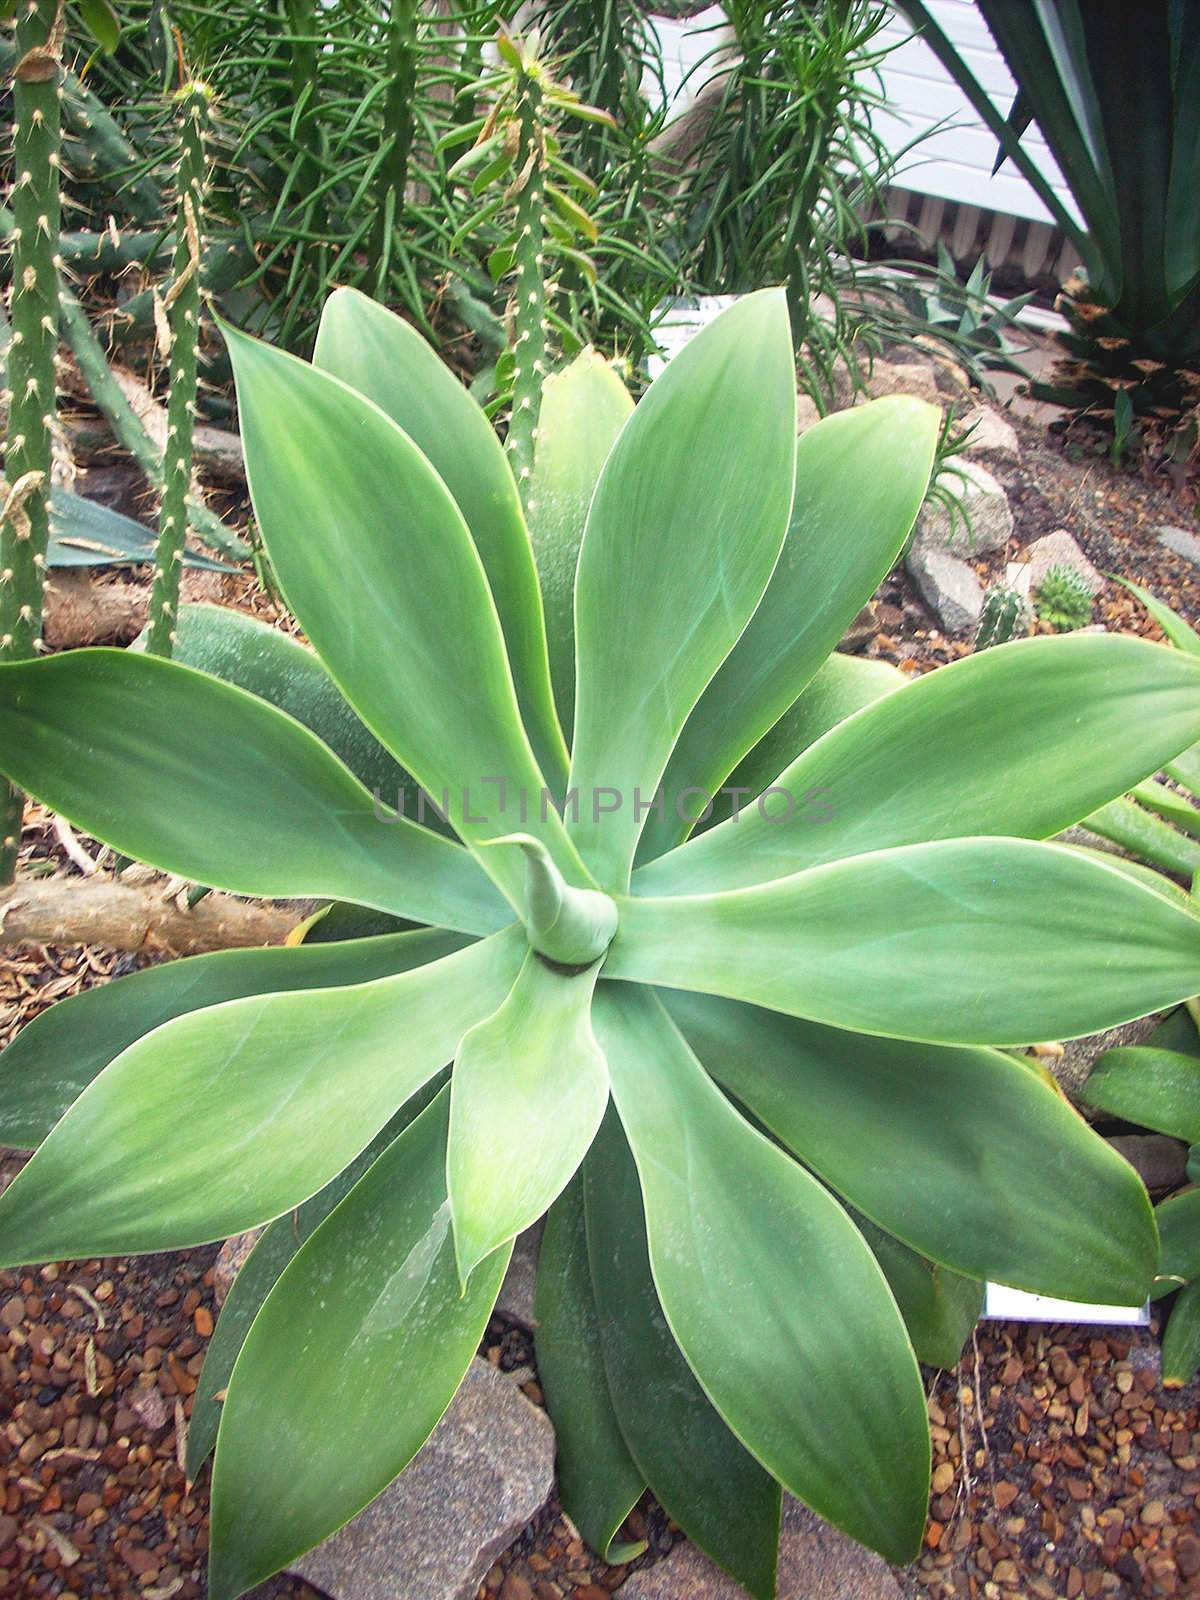 A large green plant in a greenhouse